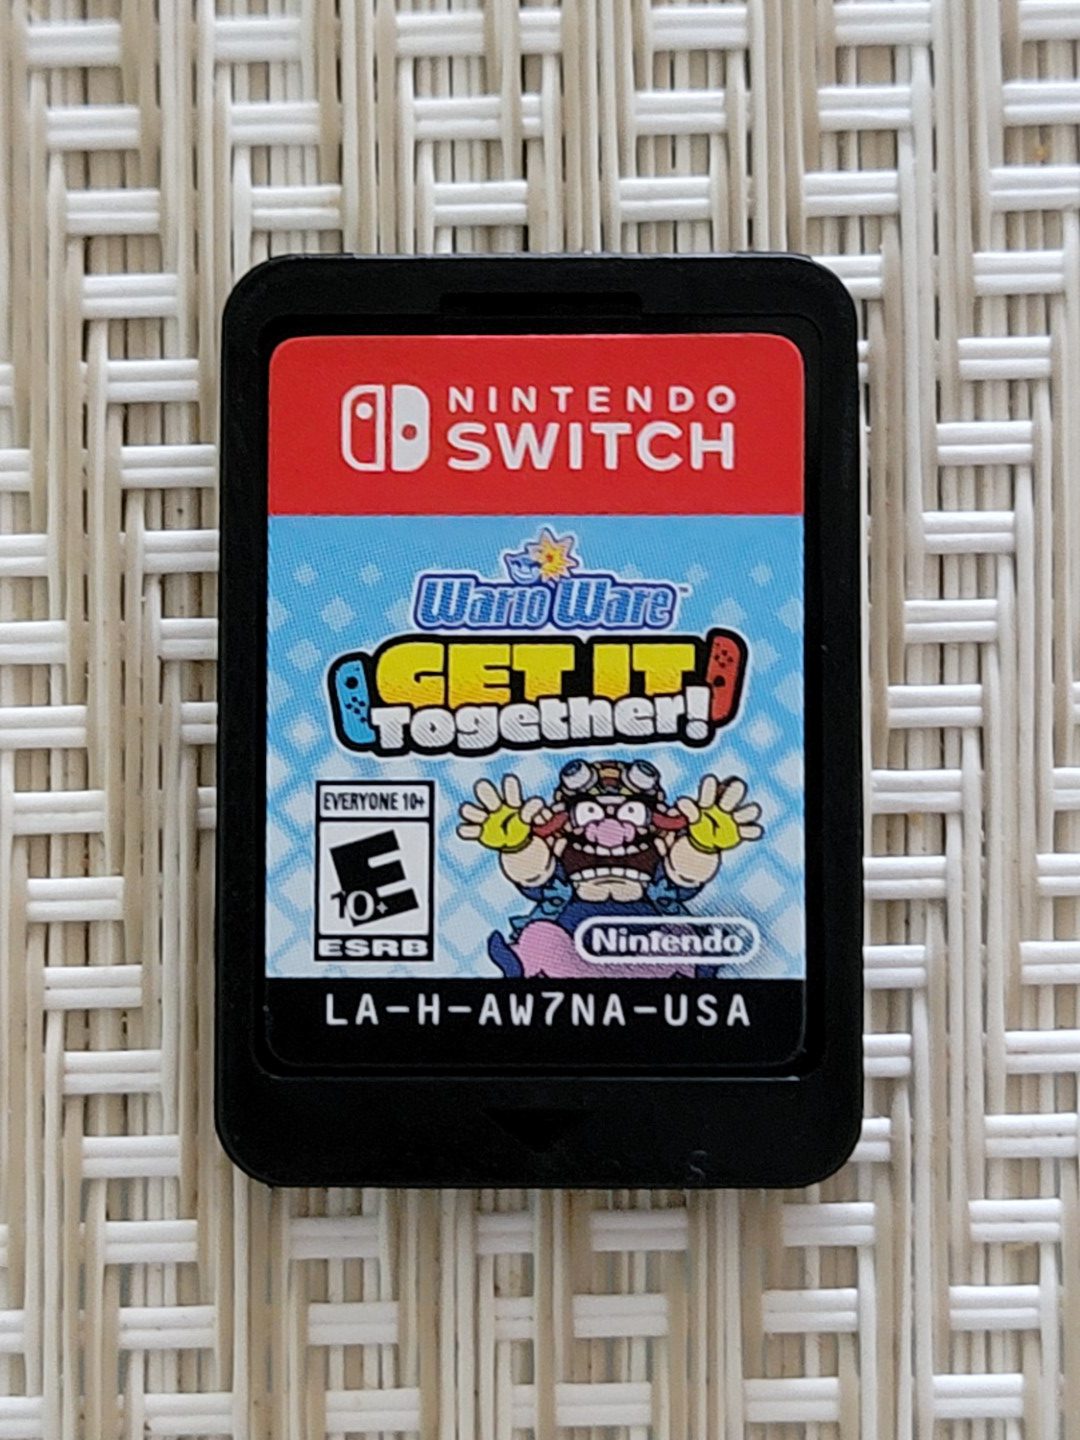 Game Cartridge of the Nintendo Switch game Wario Ware: Get It Together